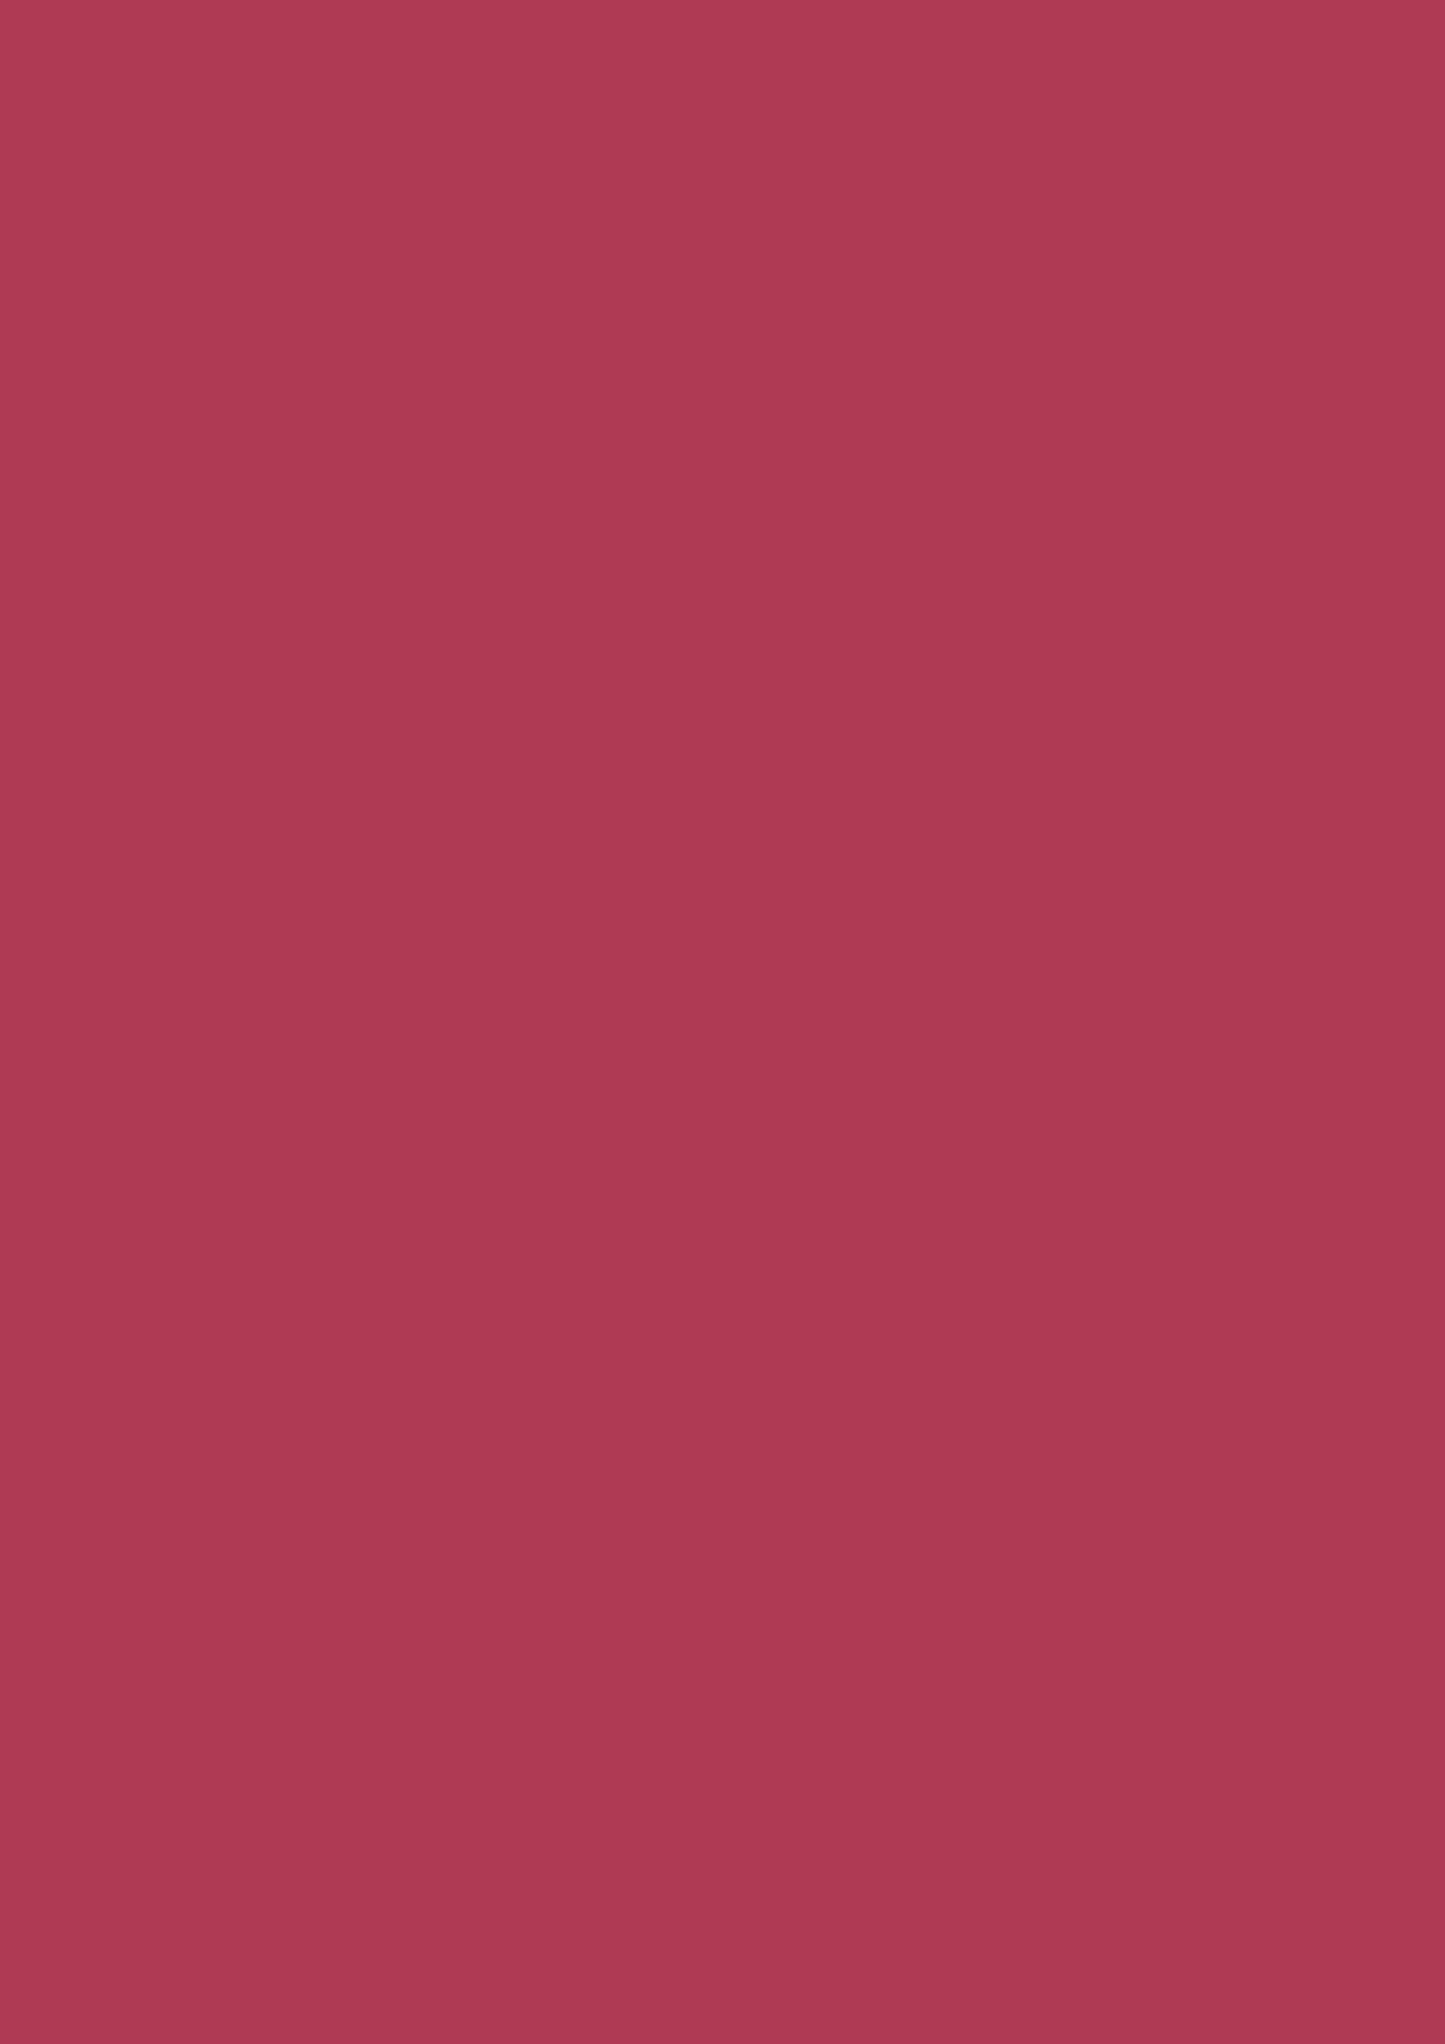 Dead Flat - Farrow and Ball - Rectory Red 217 - Allround